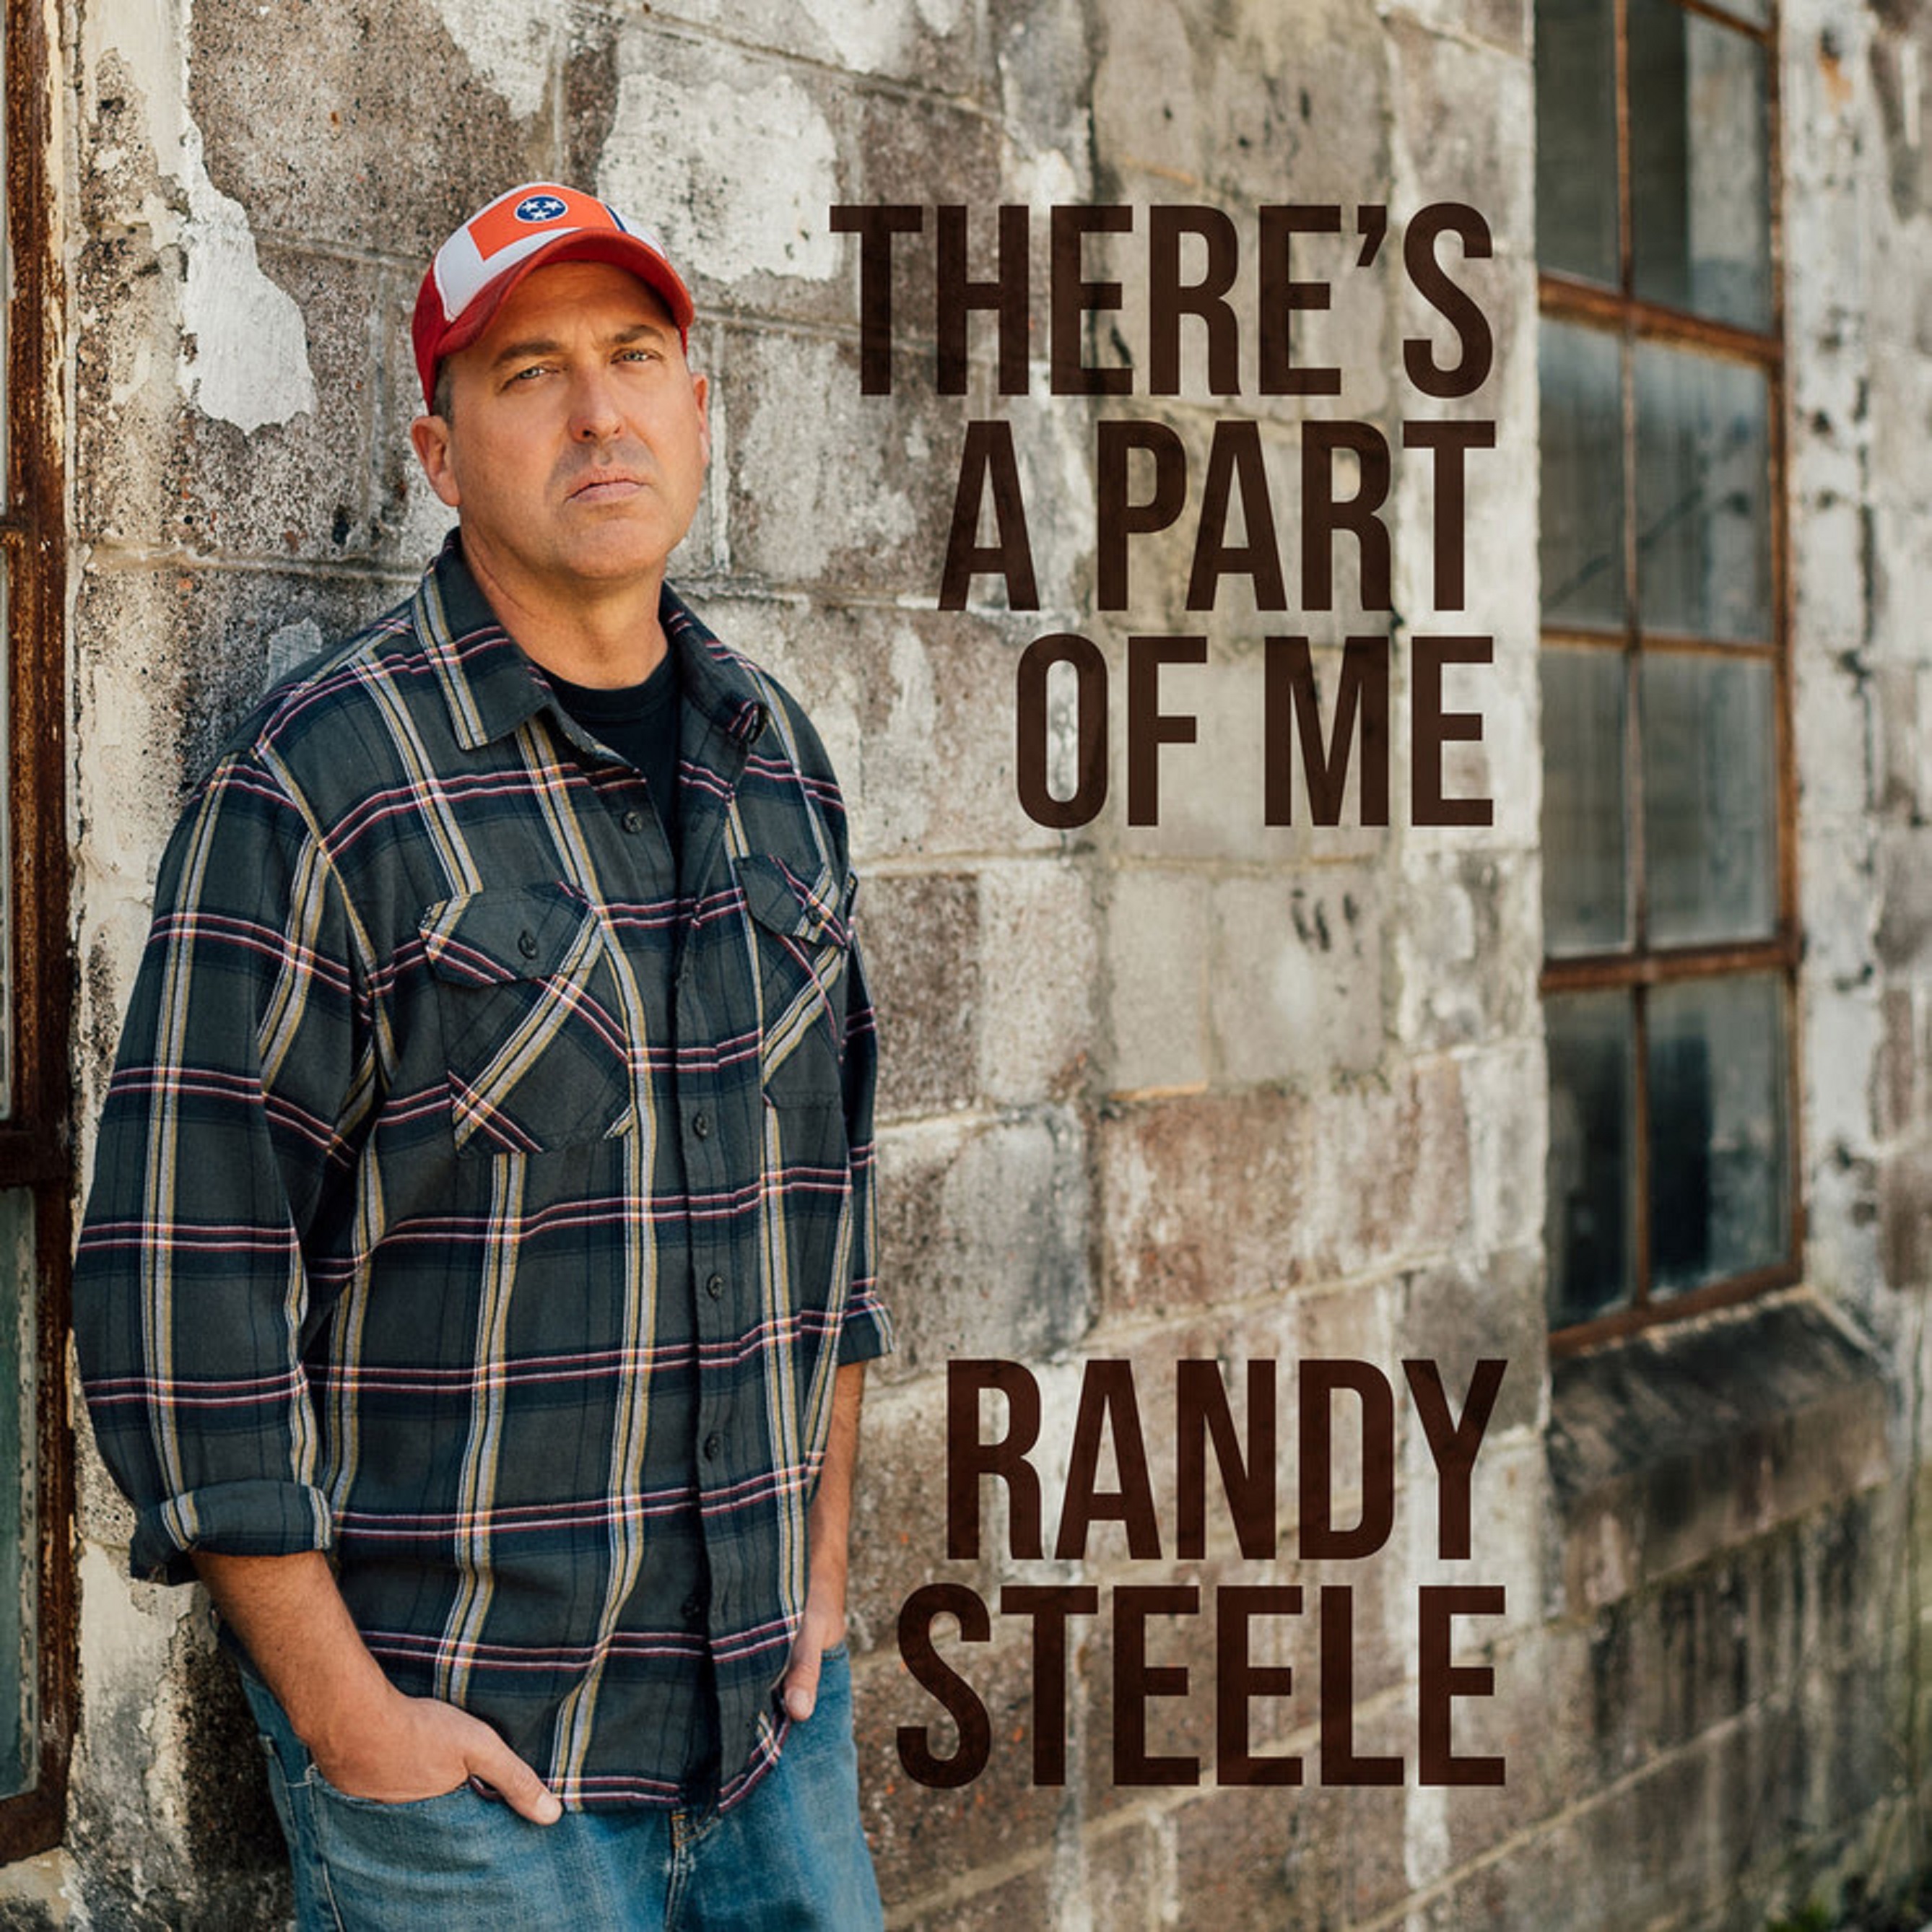 Firefighting Banjo Picker, Randy Steele, Releases Bluegrass Single “There's a Part of Me” w/ High Cold Wind